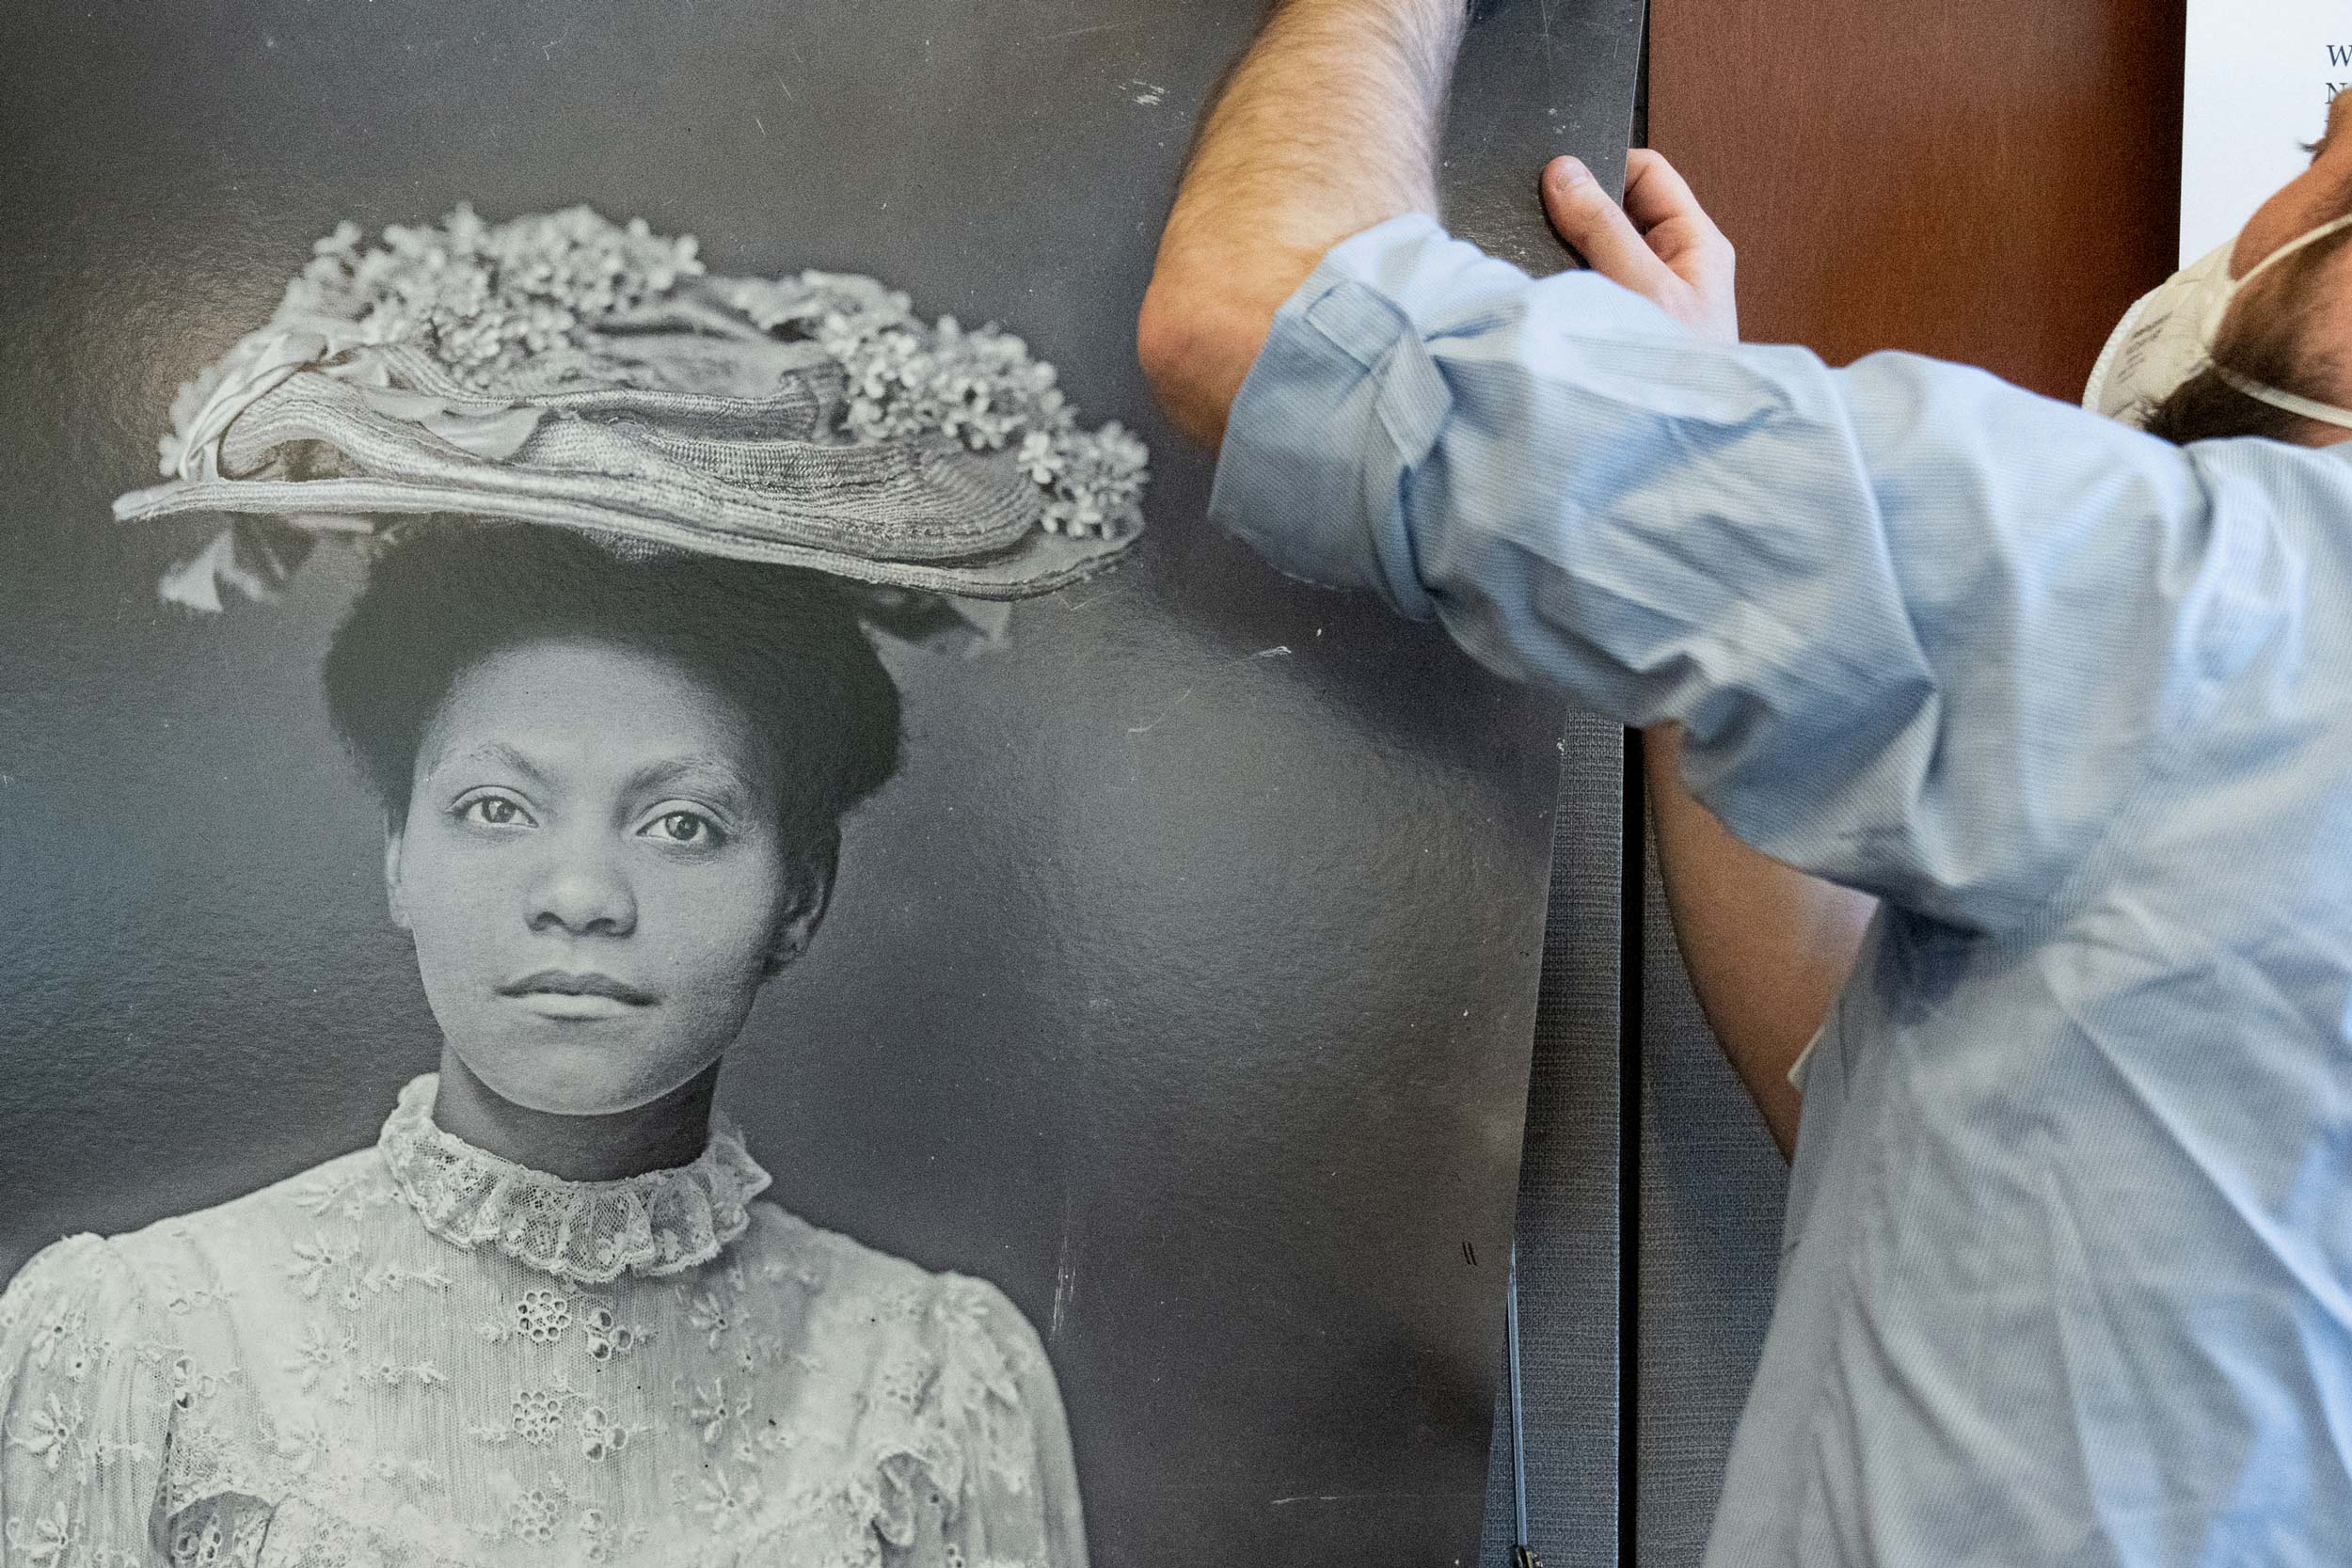 Pop-Up Exhibit of African American Portraits Highlights Pride, Hints at History